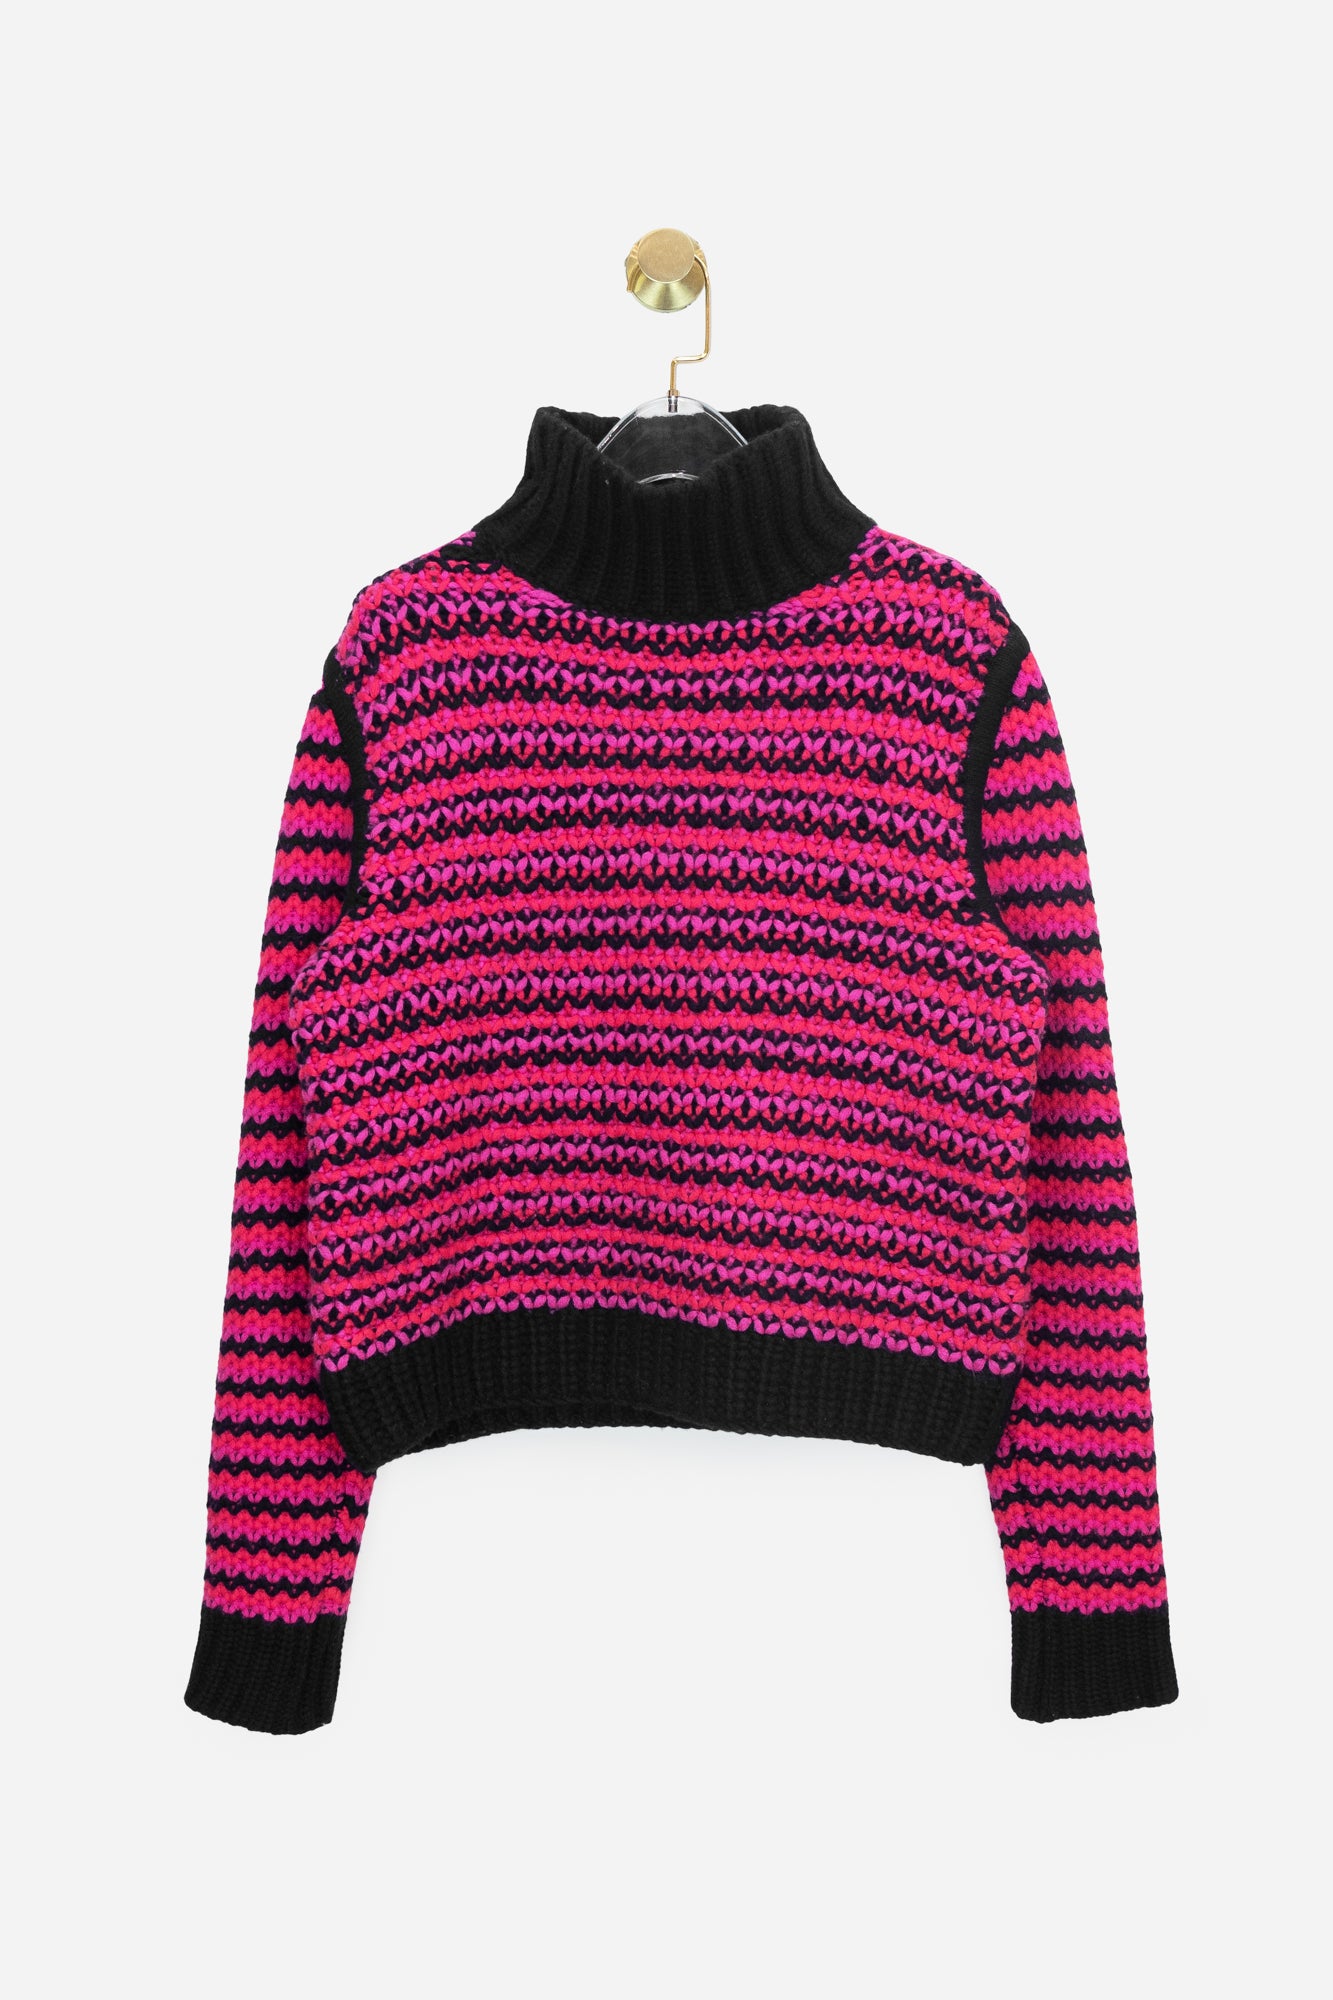 Two Tone Pink Turtle Neck Knit Sweater